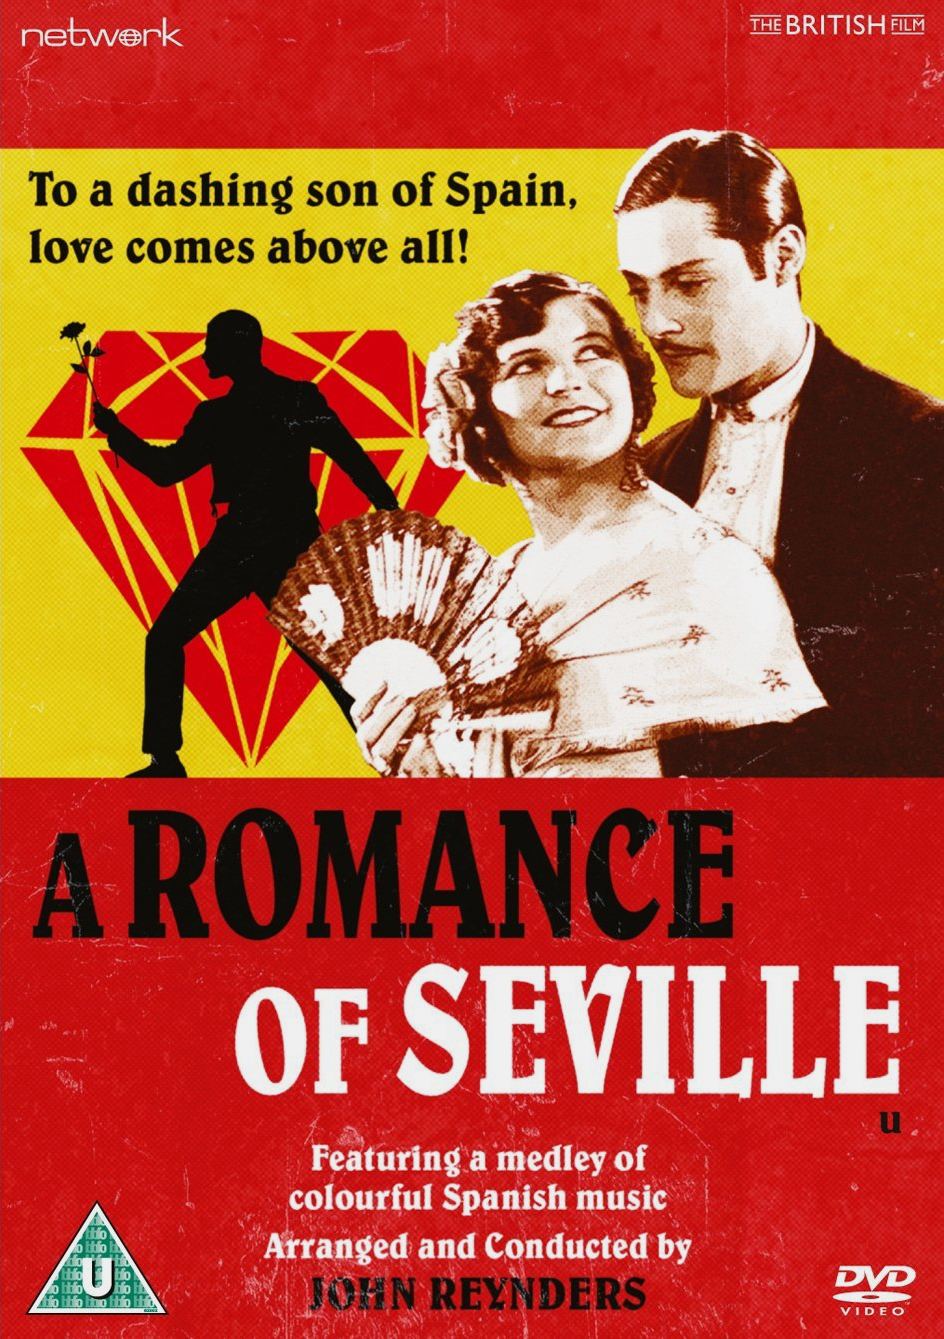 The Romance of Seville DVD from Network and The British Film